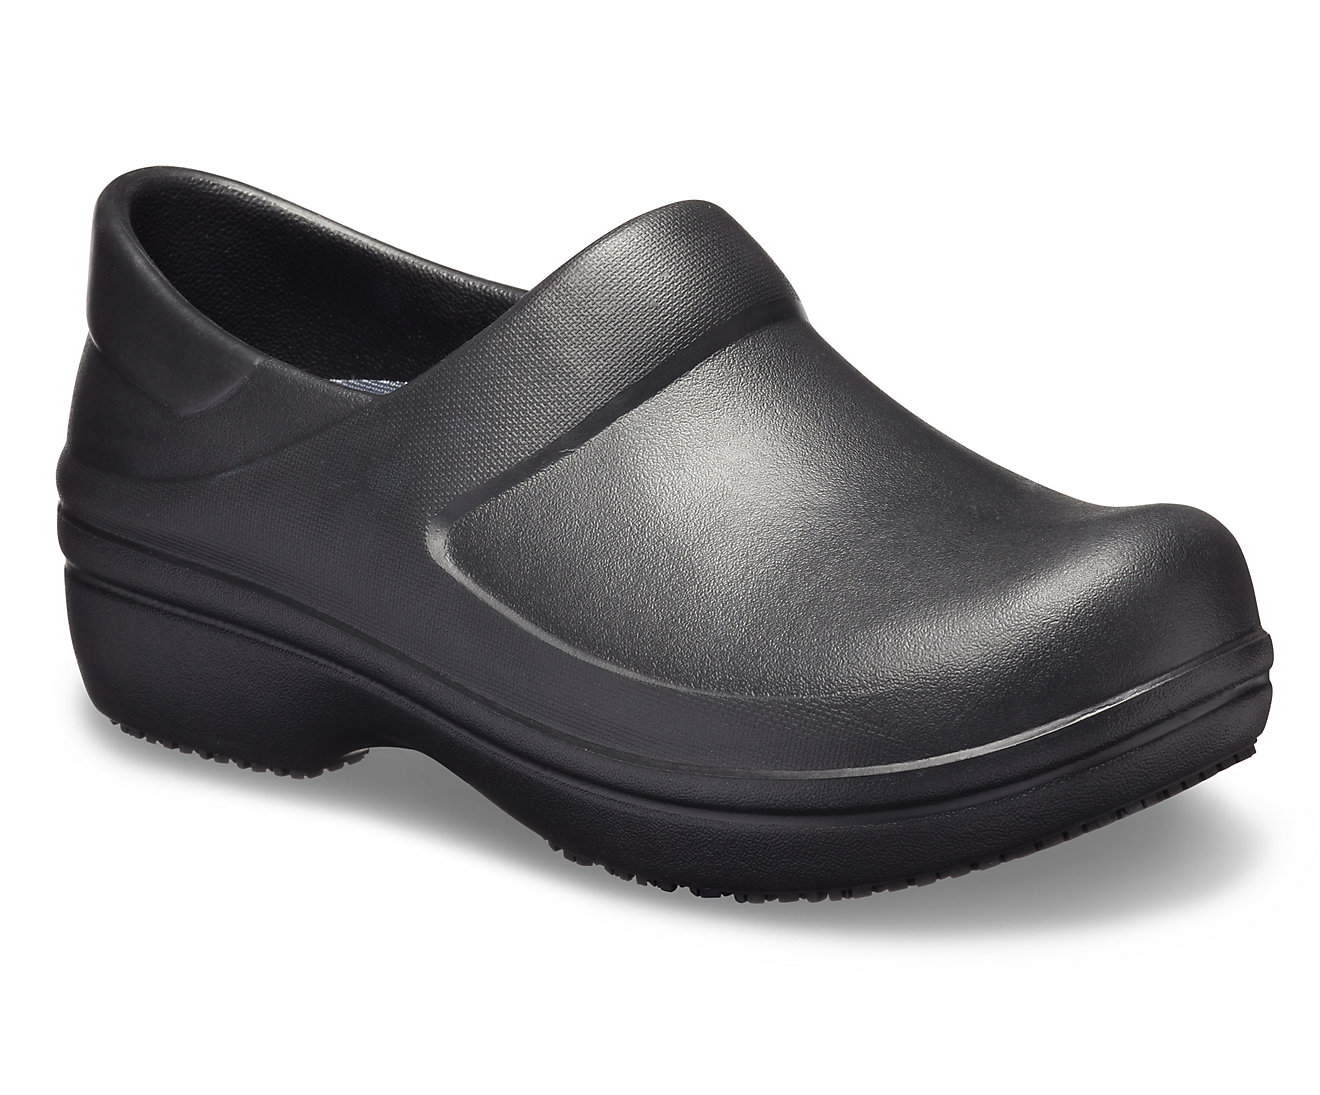 crocs shoes for healthcare workers